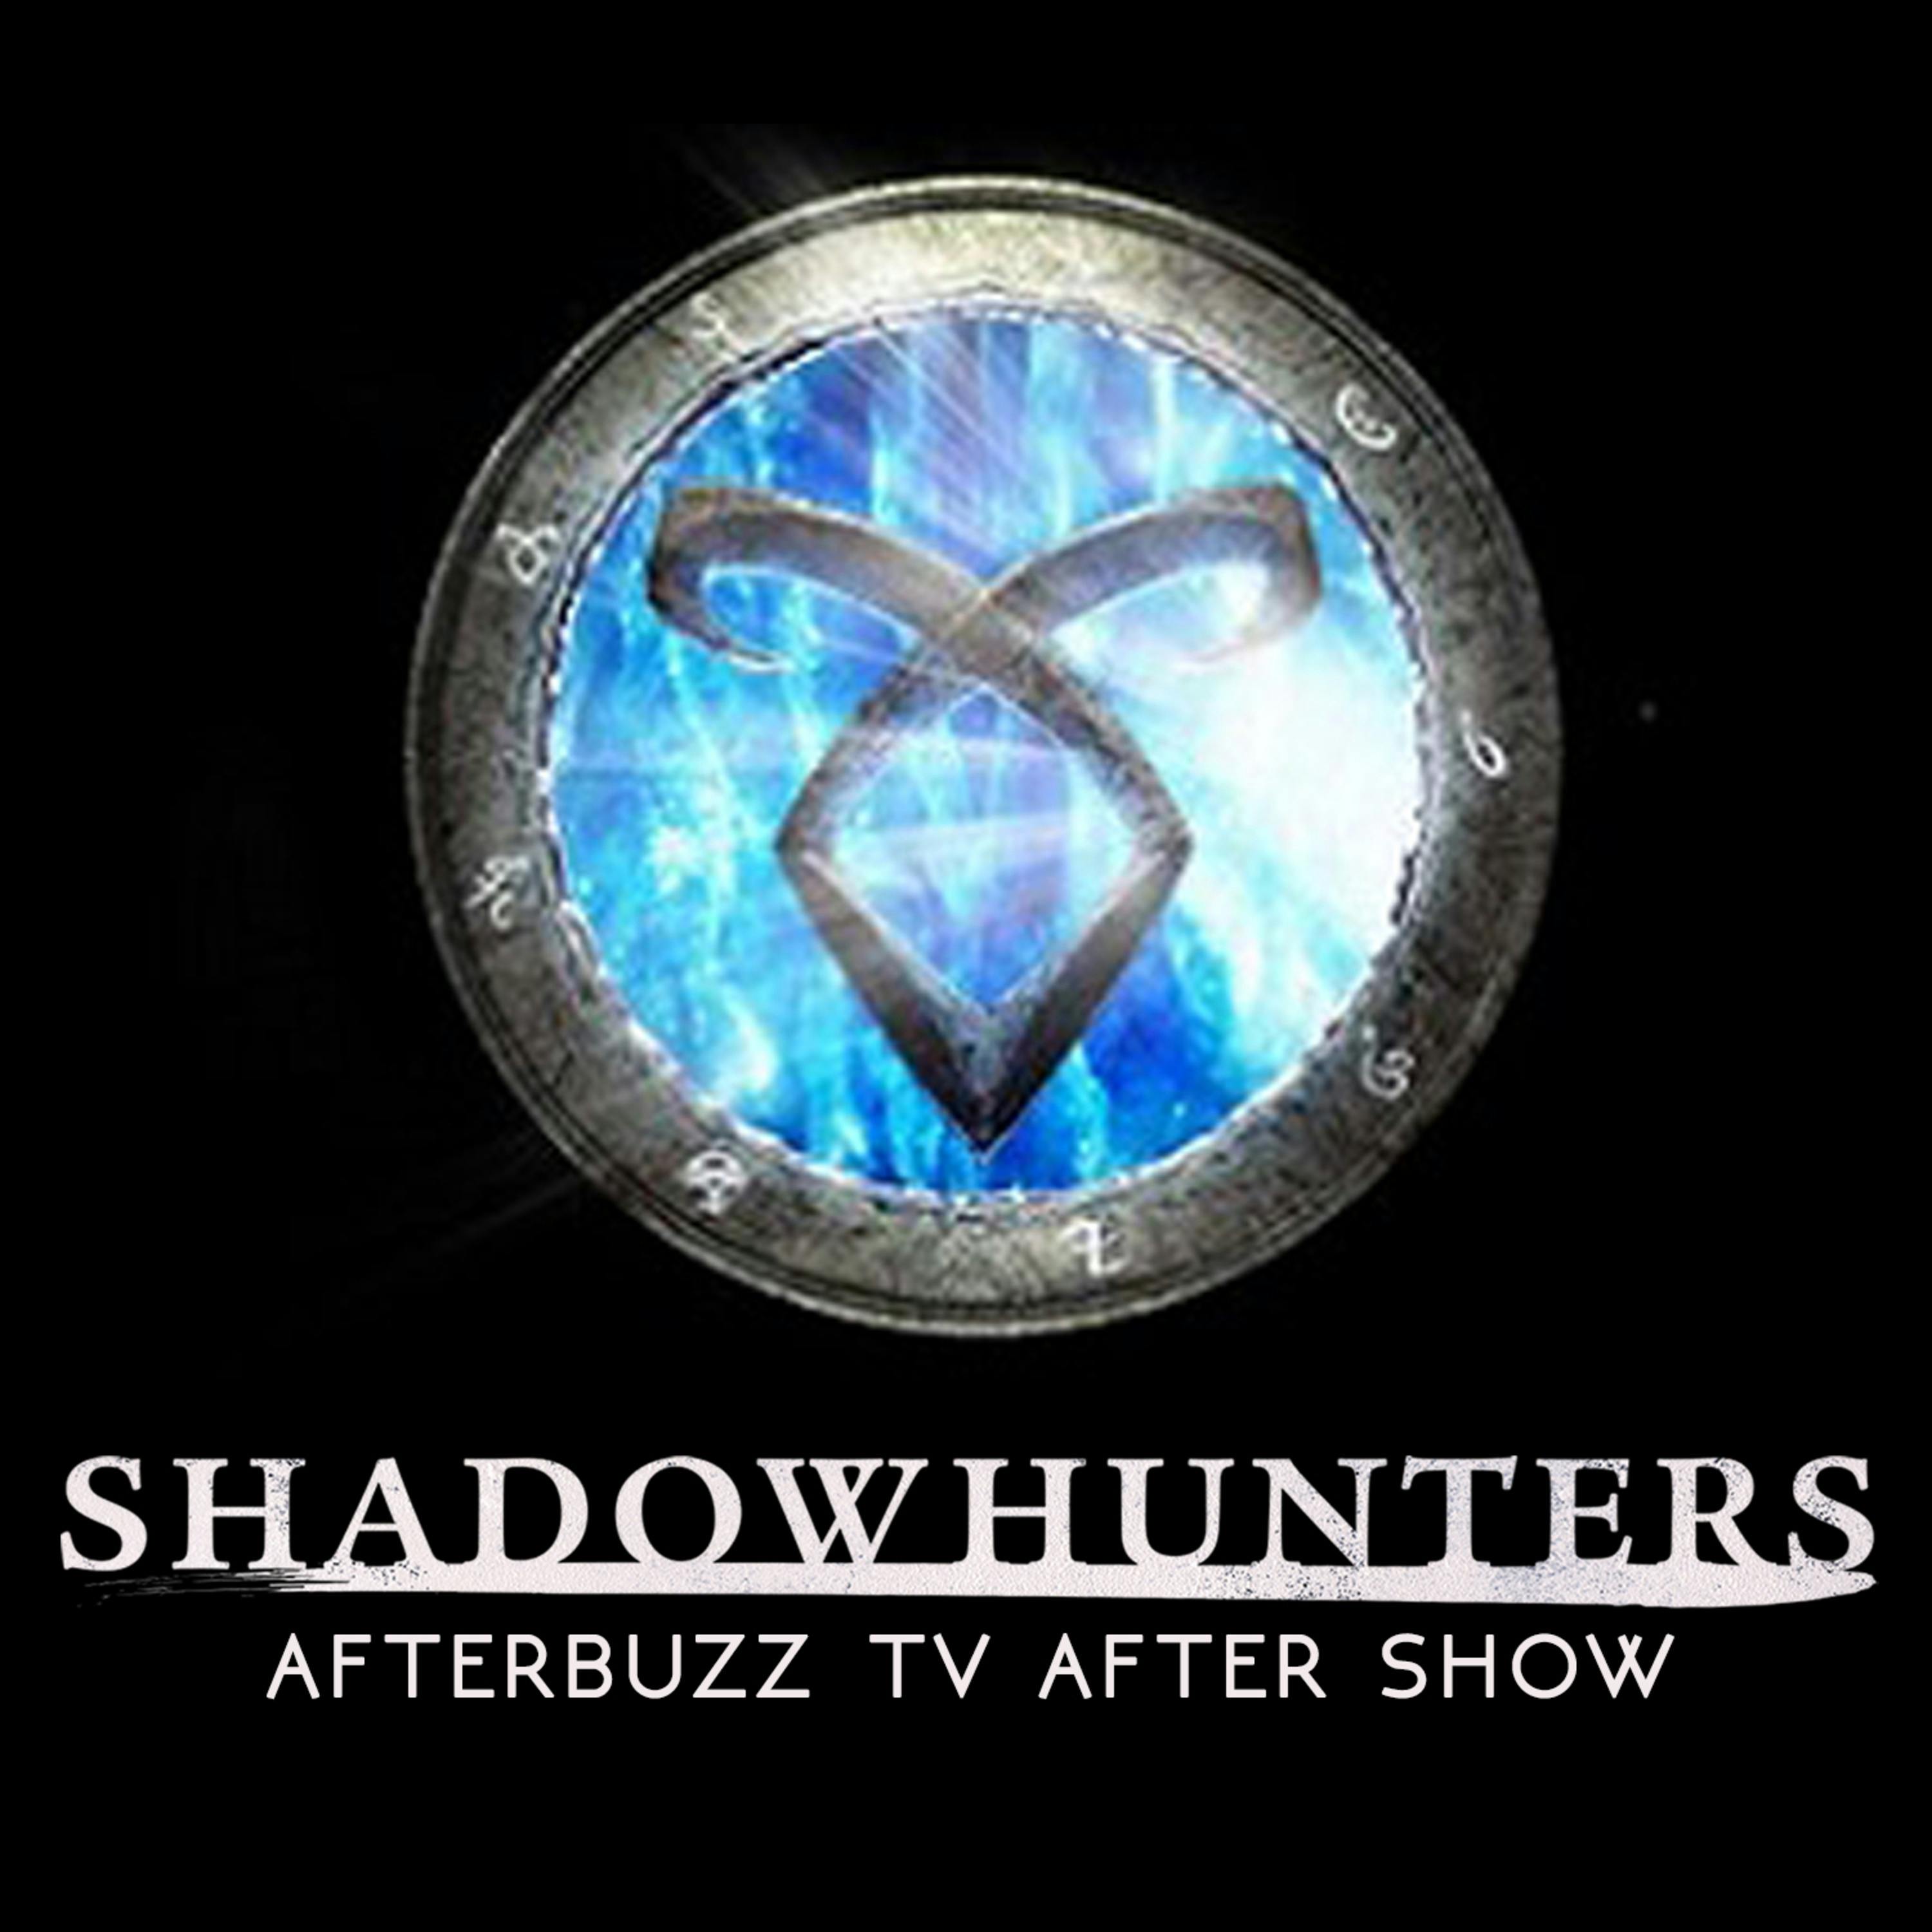 ”Heavenly Fire” Season 3 Episode 17 ’Shadowhunters’ Review